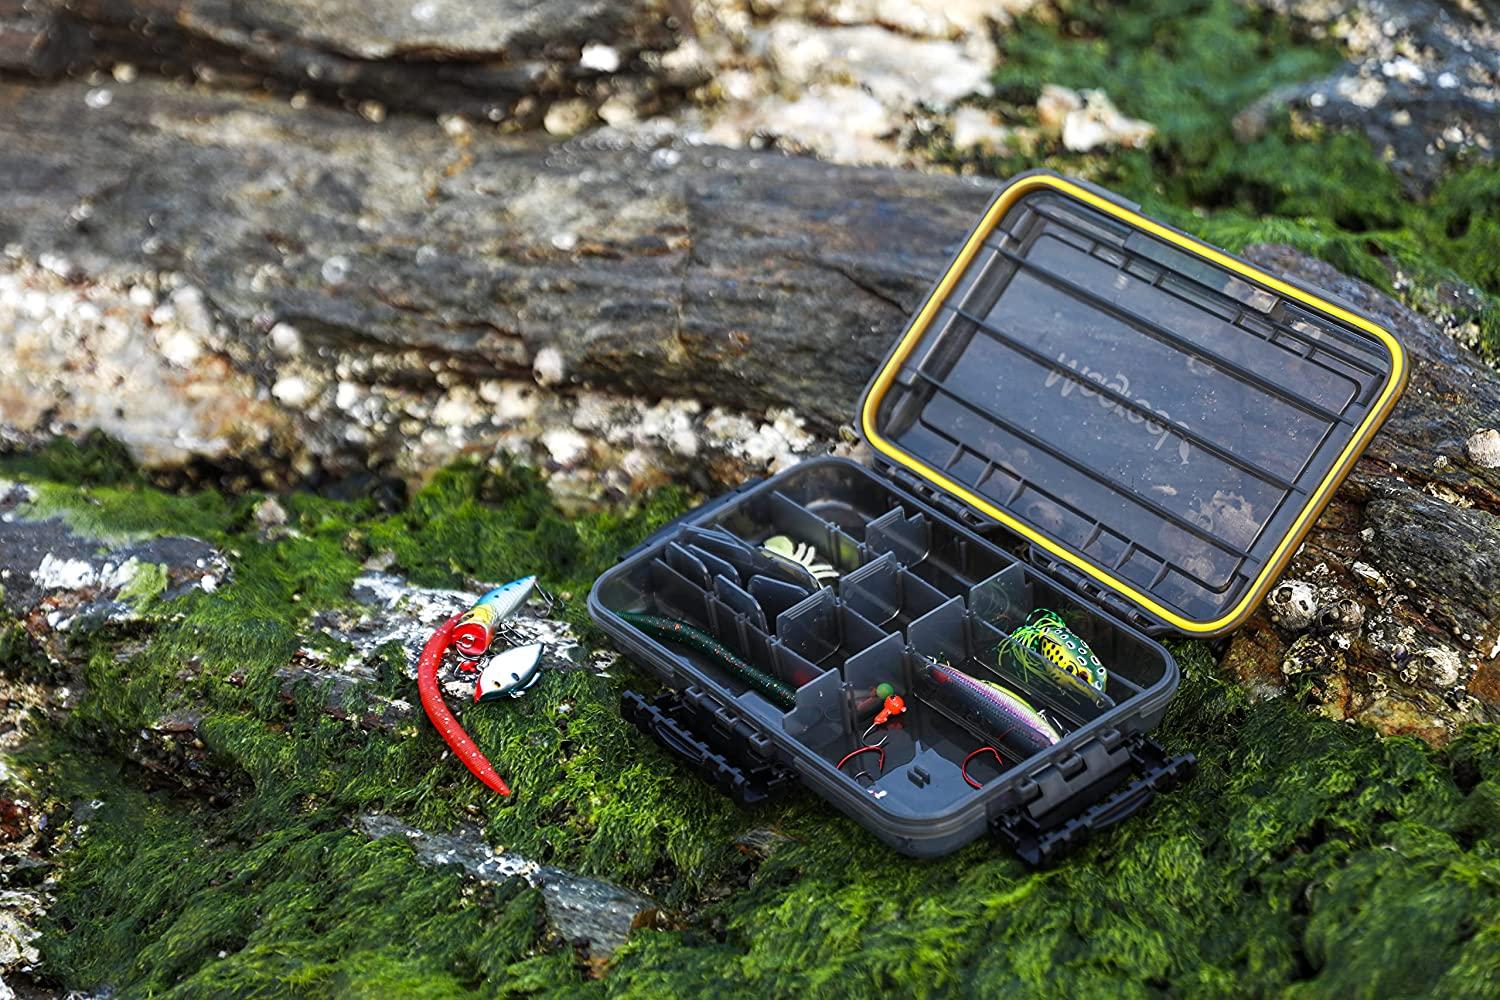 RUNCL Waterproof Seal Fishing Box Organizer with Movable Tray